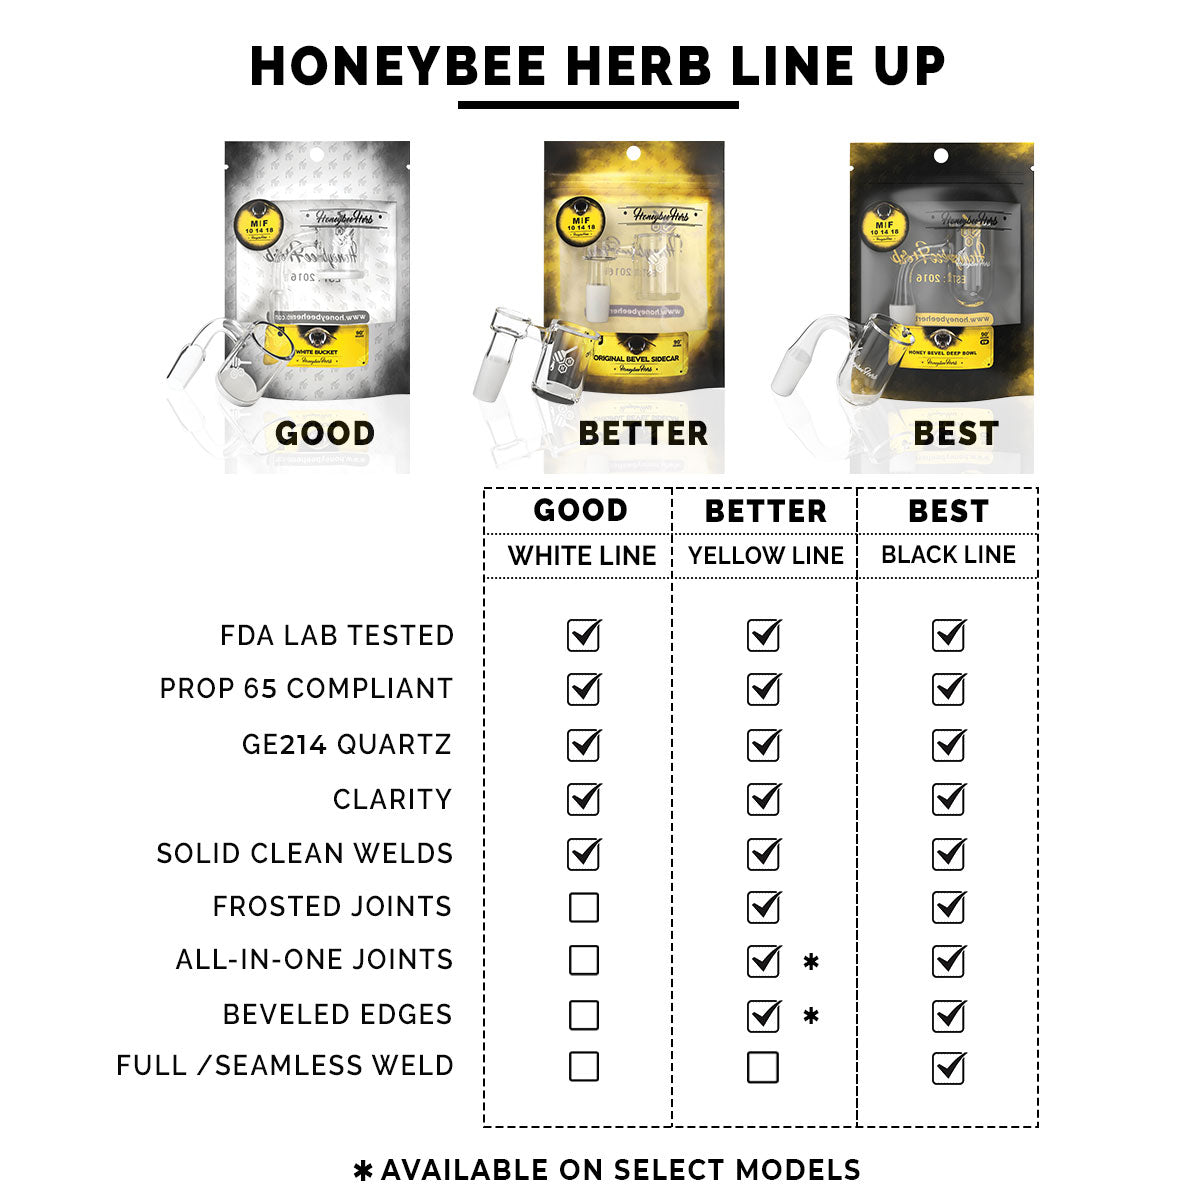 Honeybee Herb product lineup chart showing quality tiers for dab rig accessories on a white background